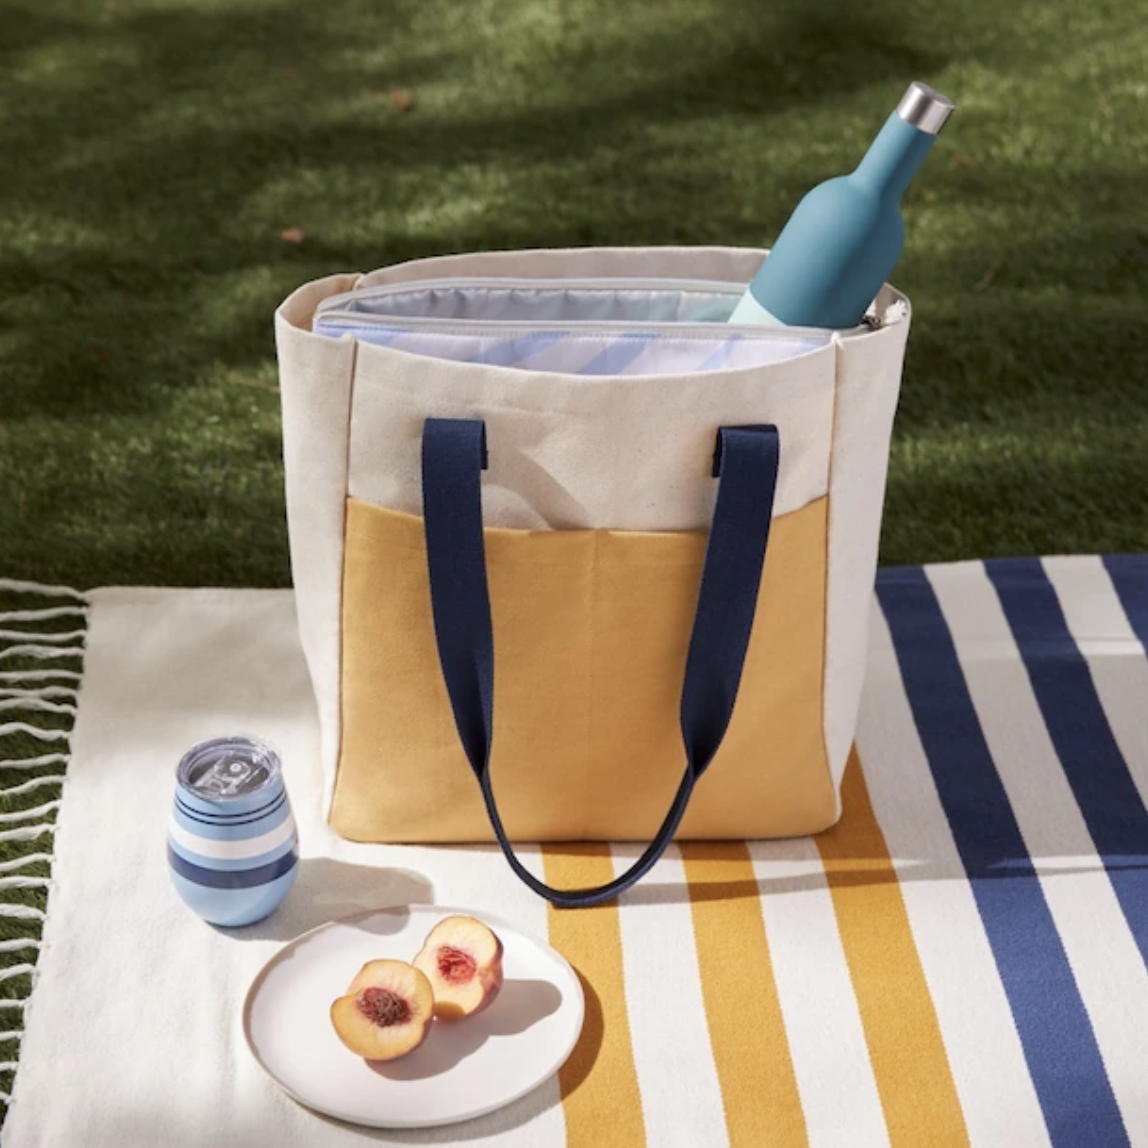 tote with a bottle in it on a towel on the ground